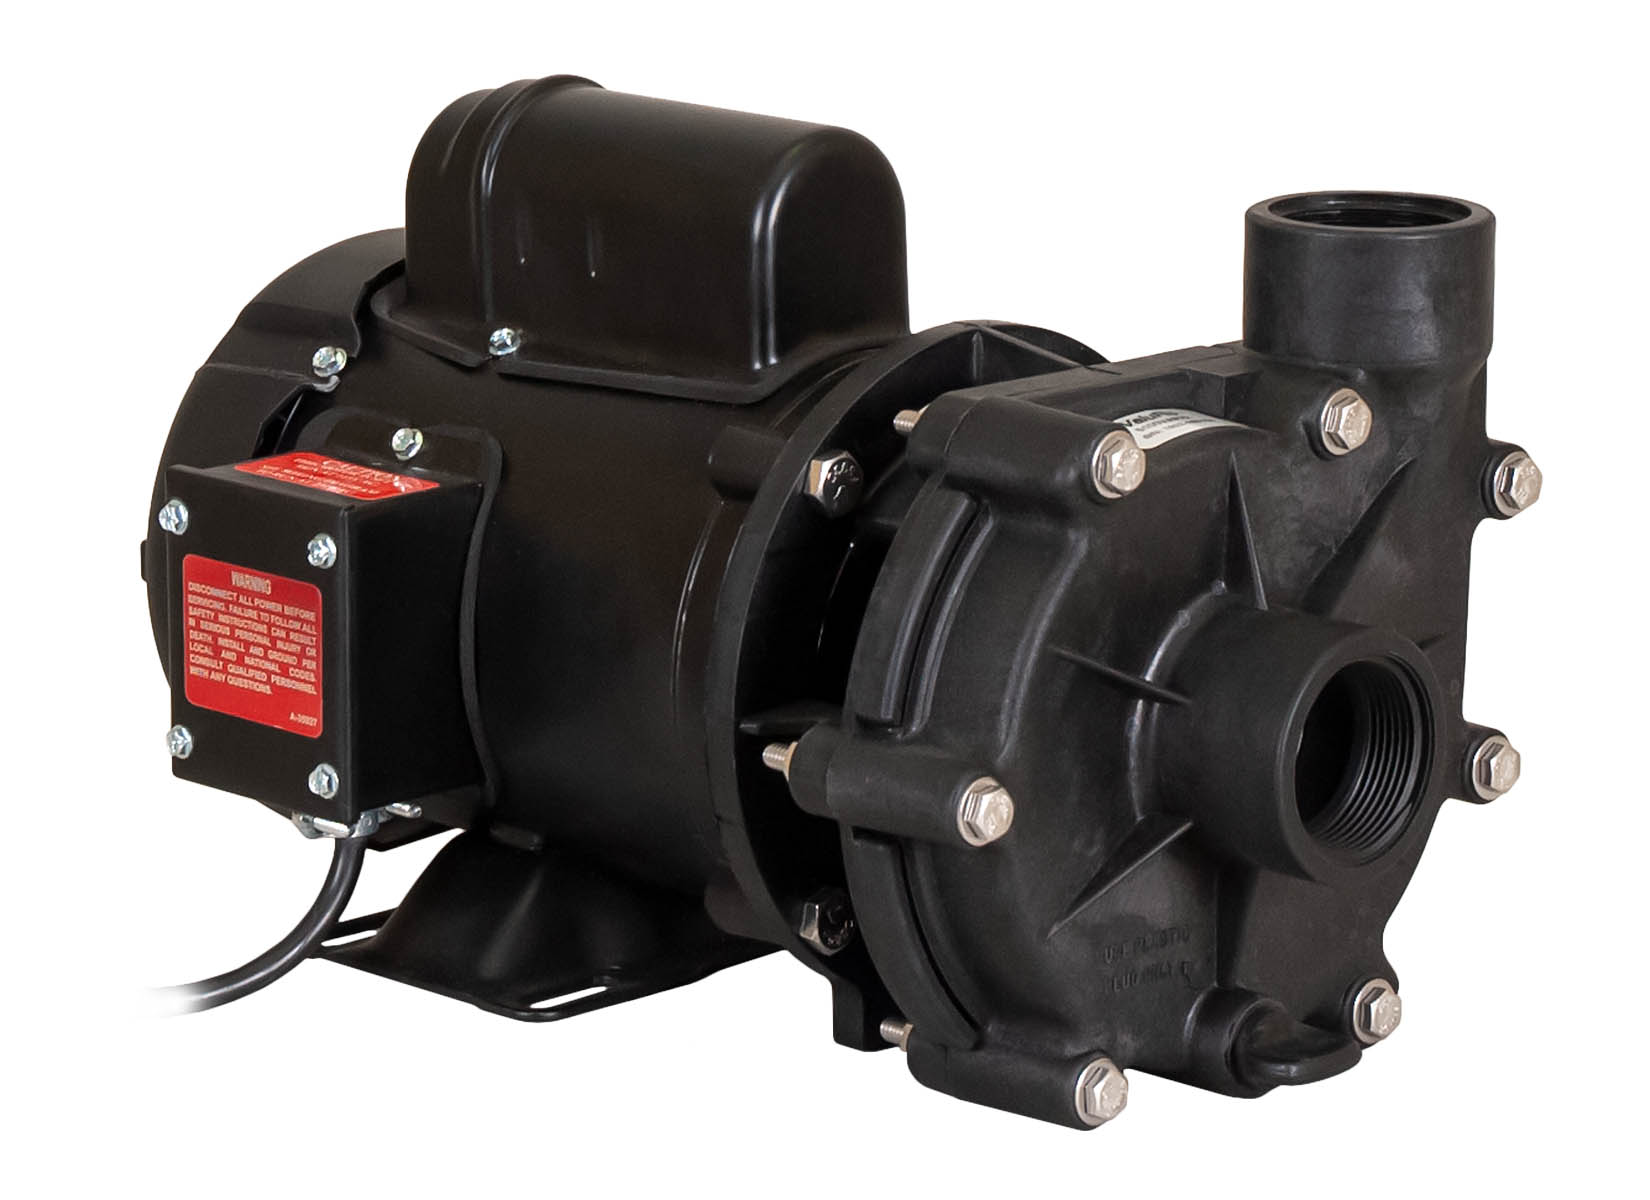 ValuFlo 1000 Pump with Leeson Motor left angle view